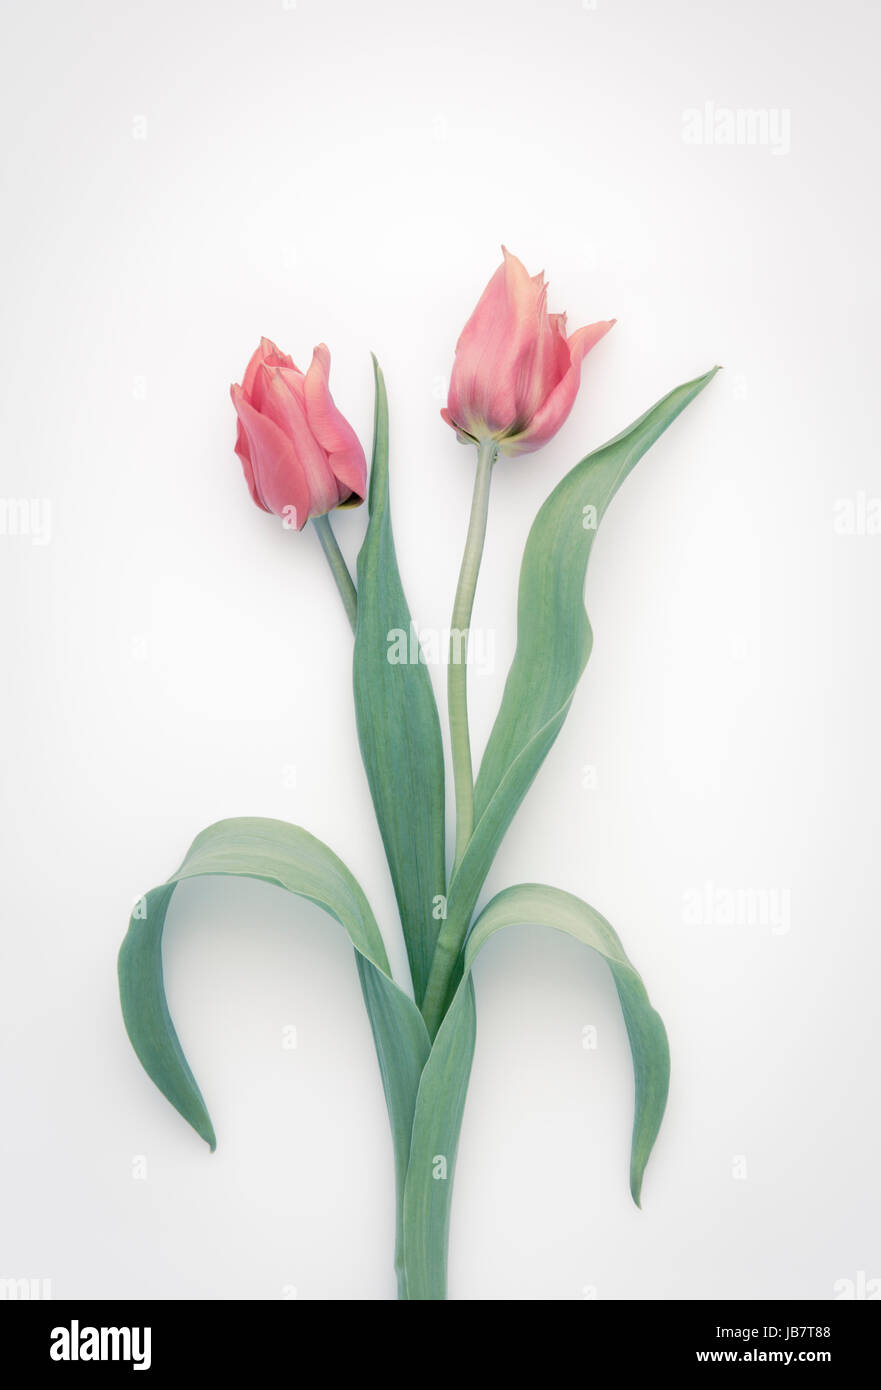 Two pink tulips Stock Photo